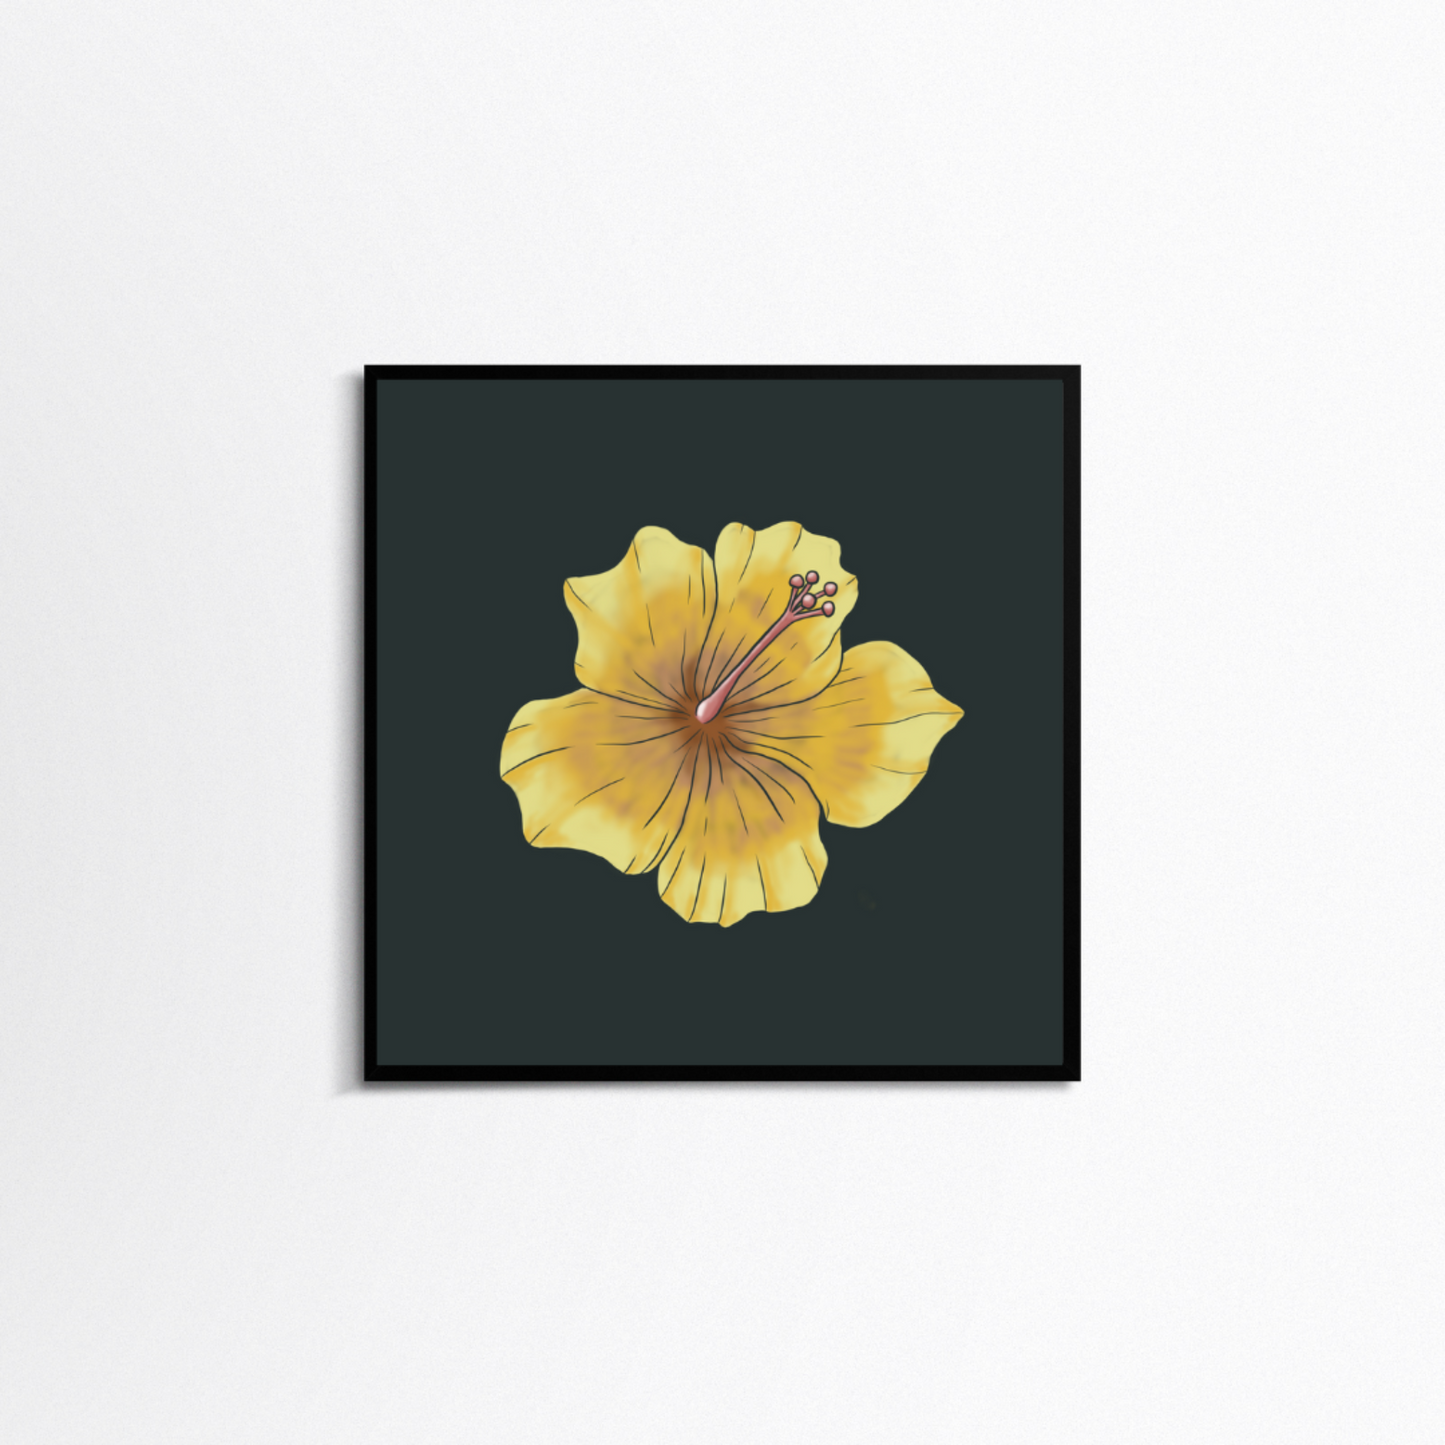 White background with a square black frame. In the frame is a print with a dark green background and a yellow hibiscus in the centre.